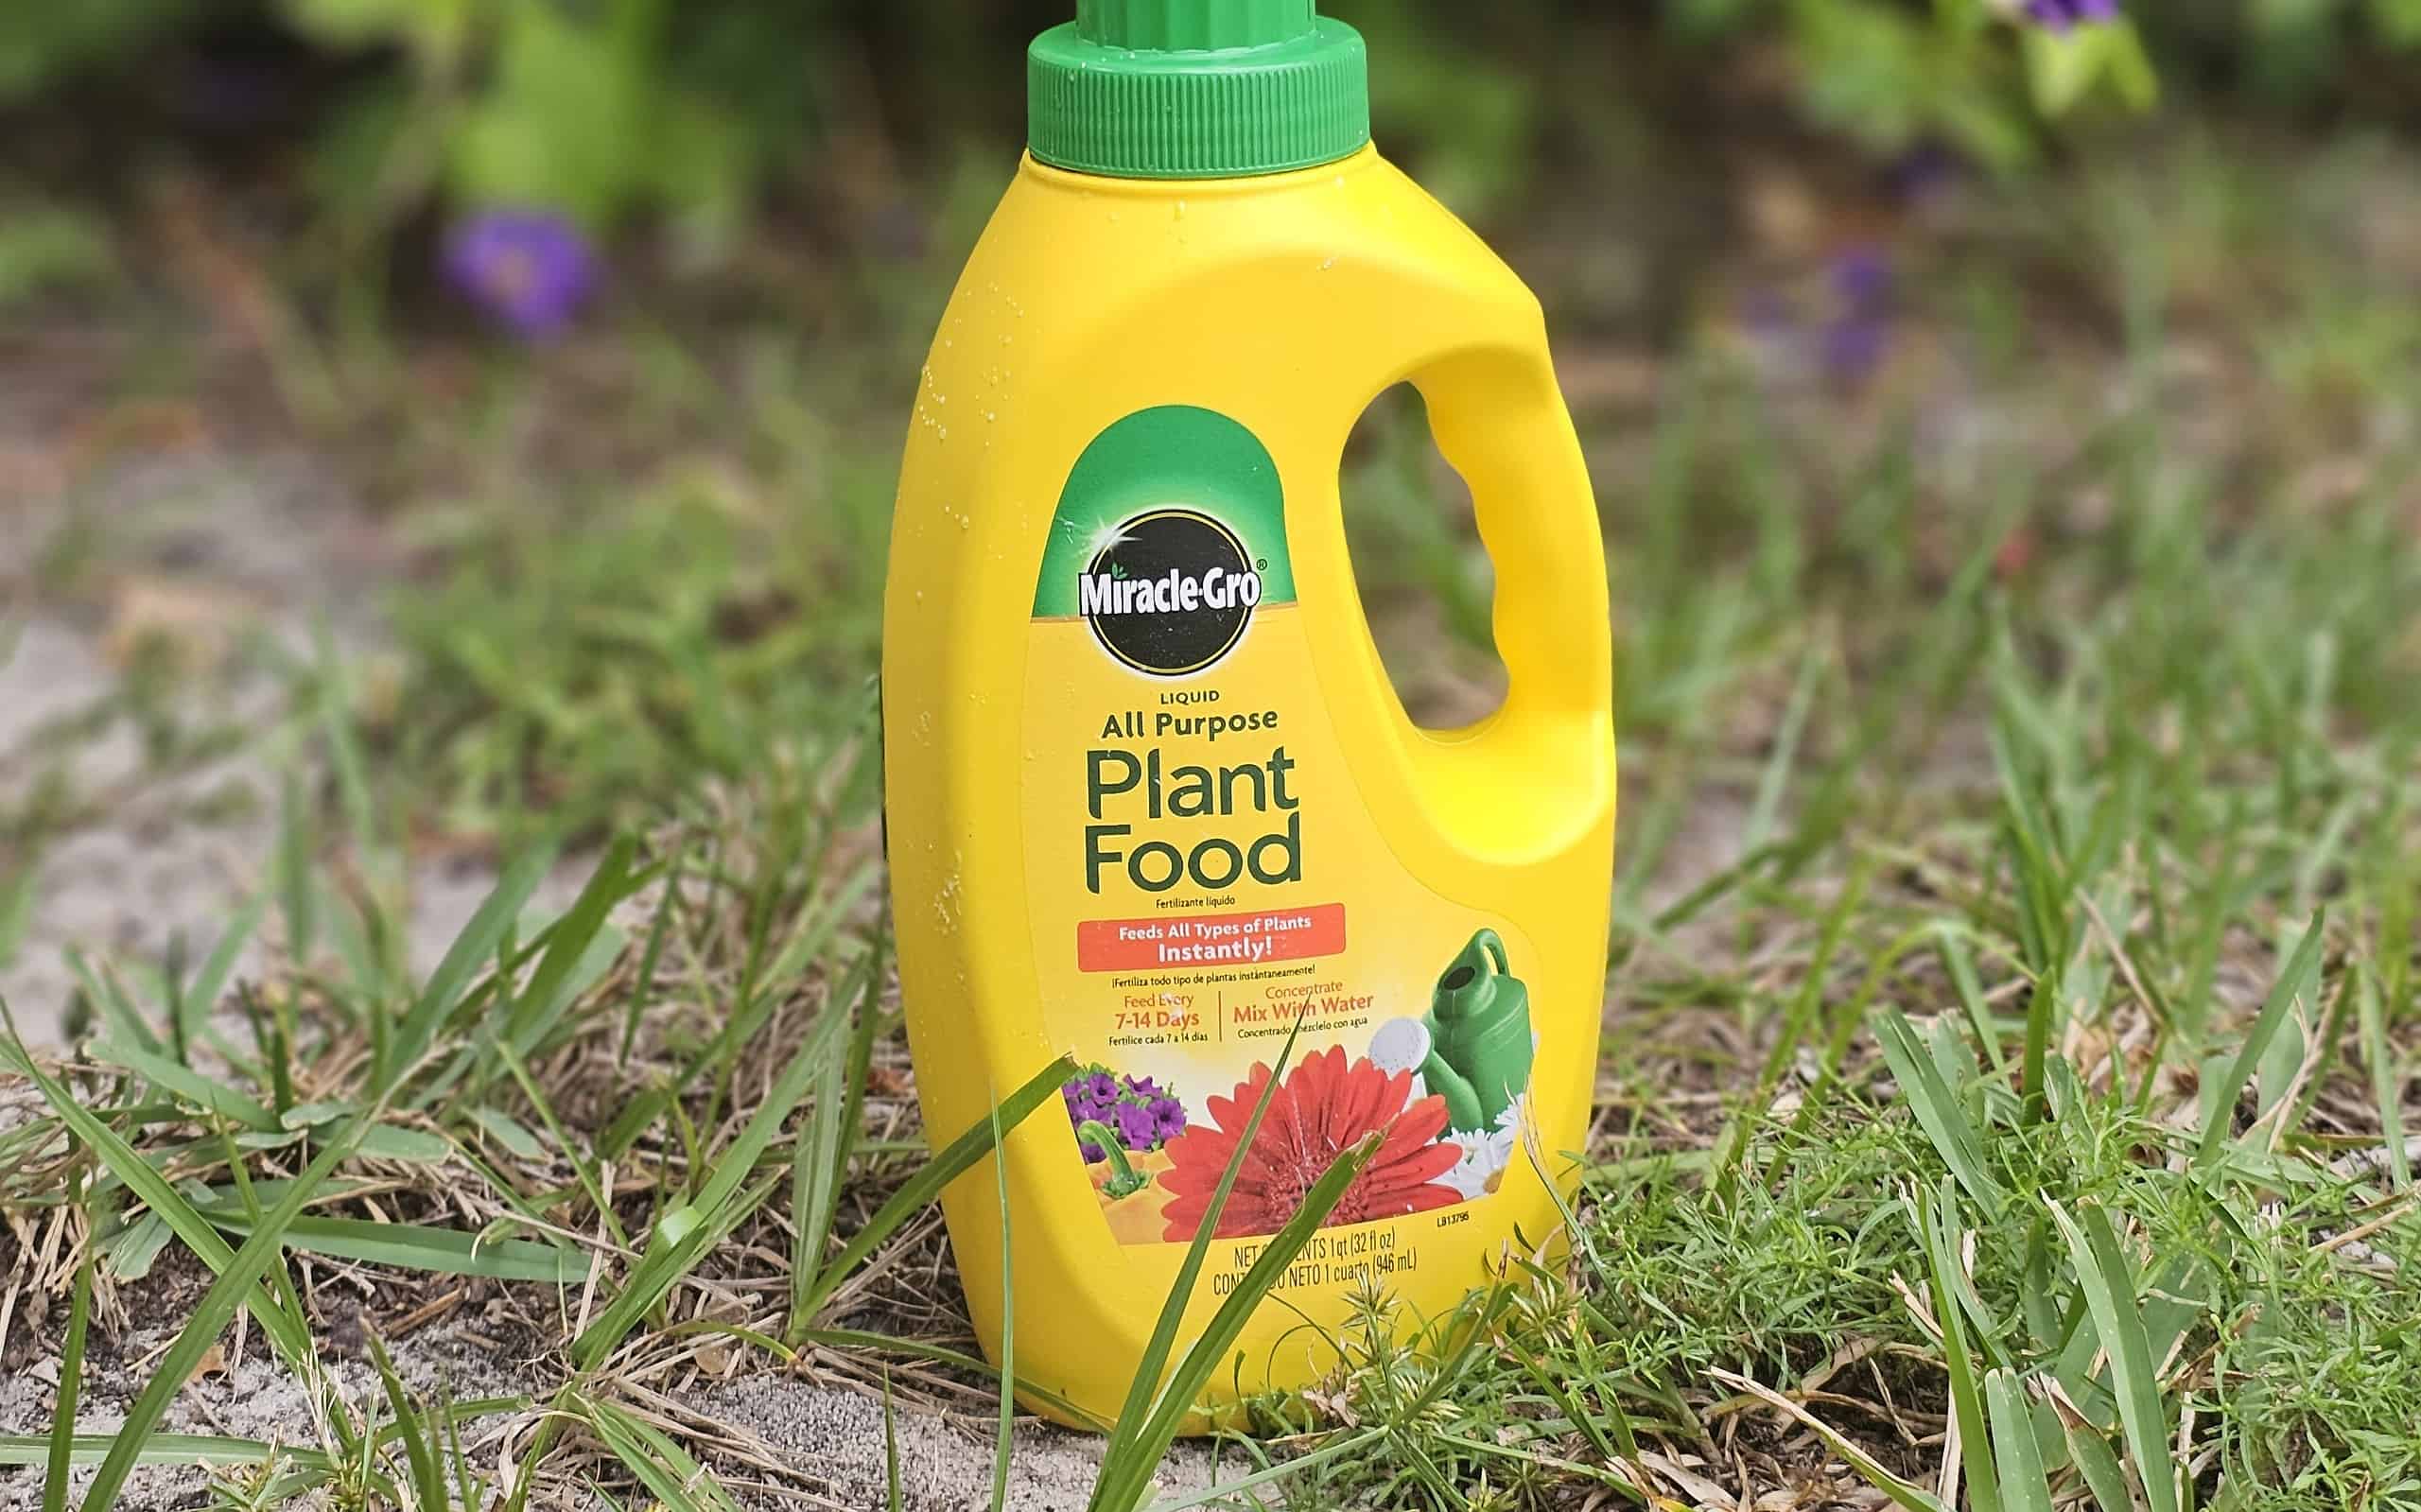 A bottle of miracle grow plant food in a yard